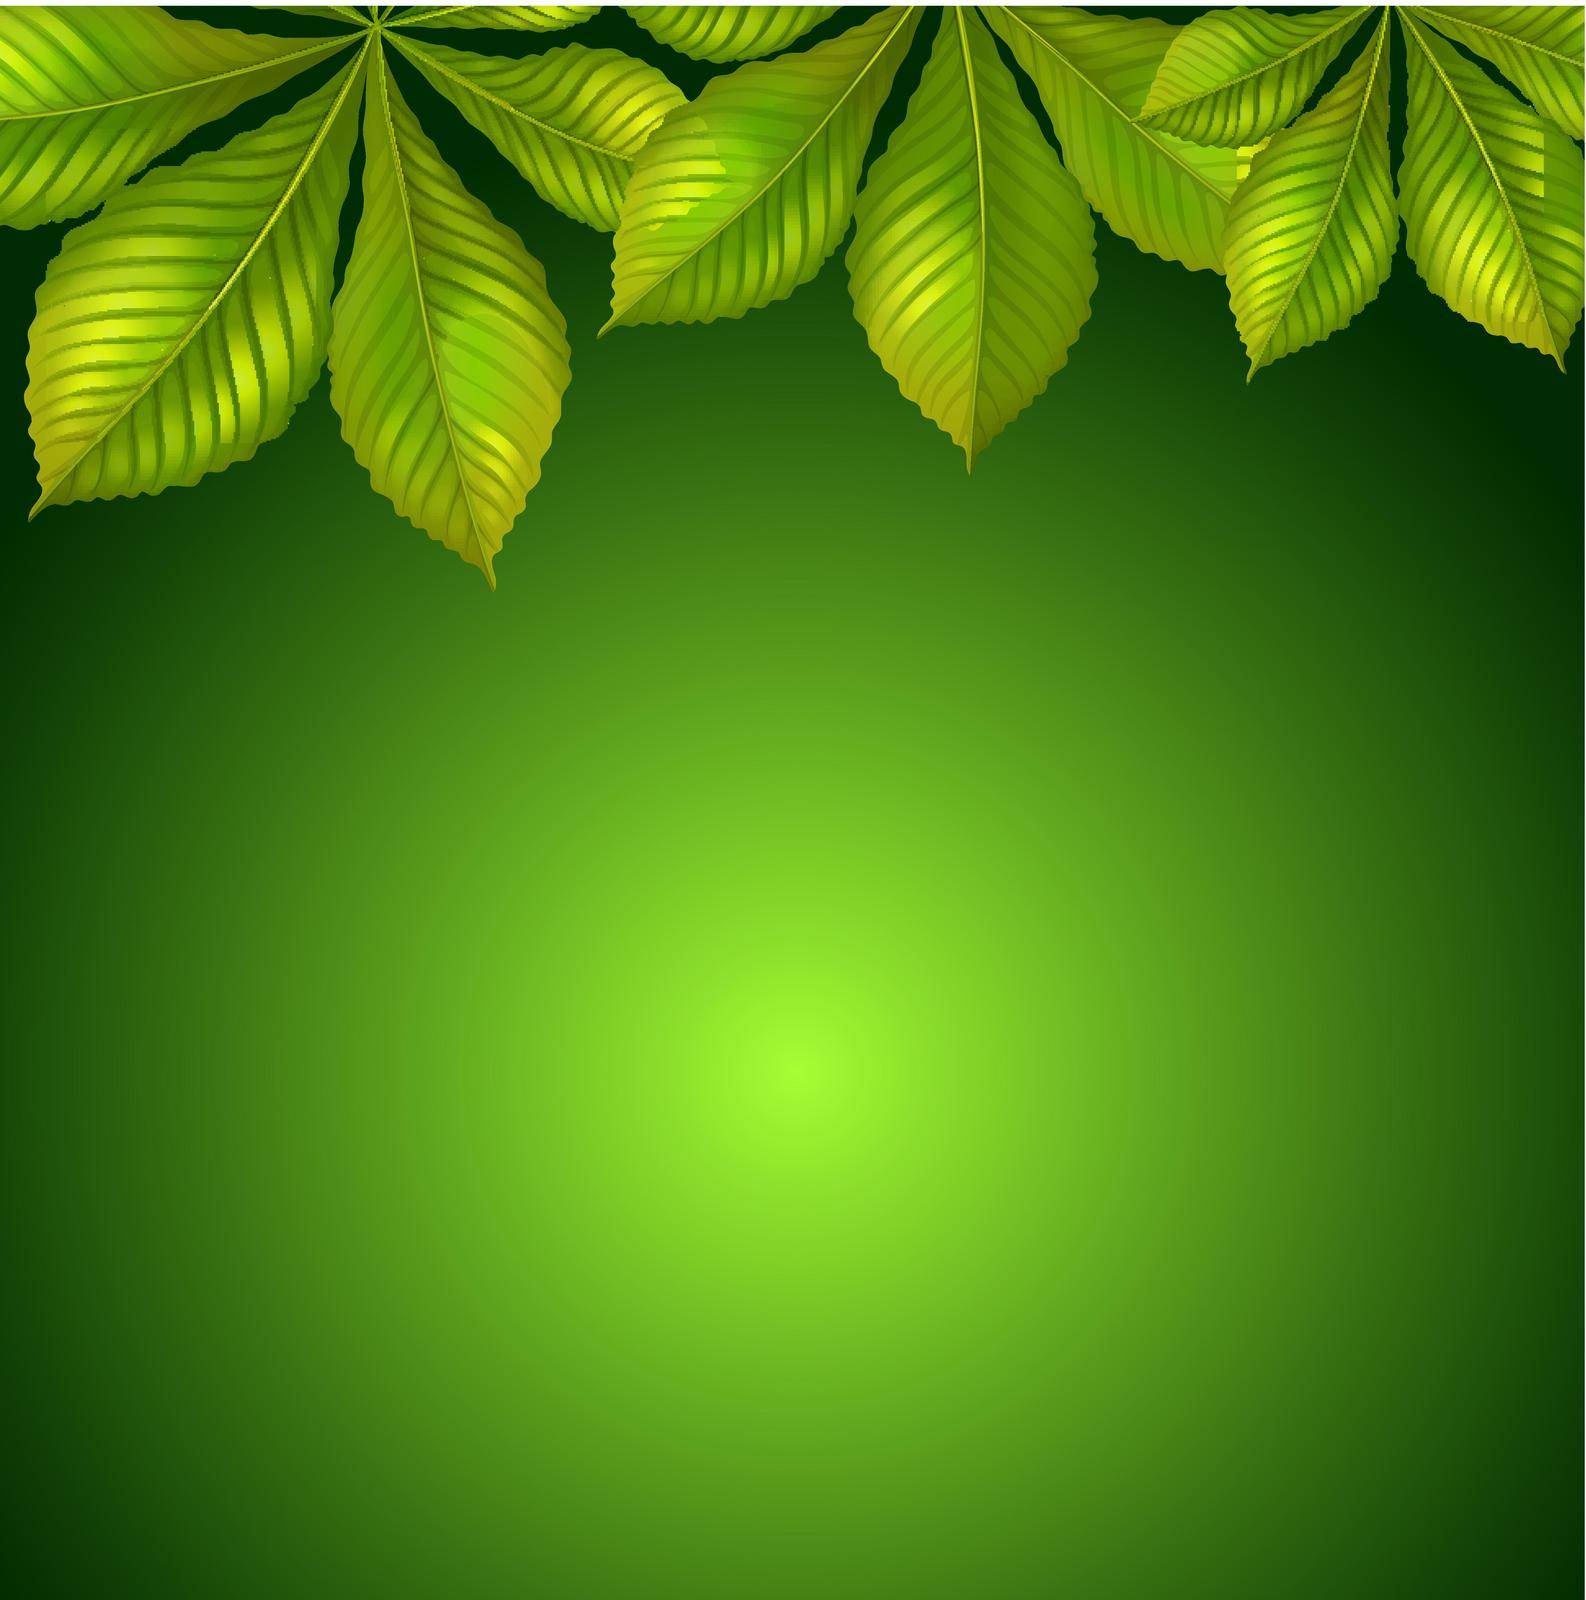 Illustration of a green background